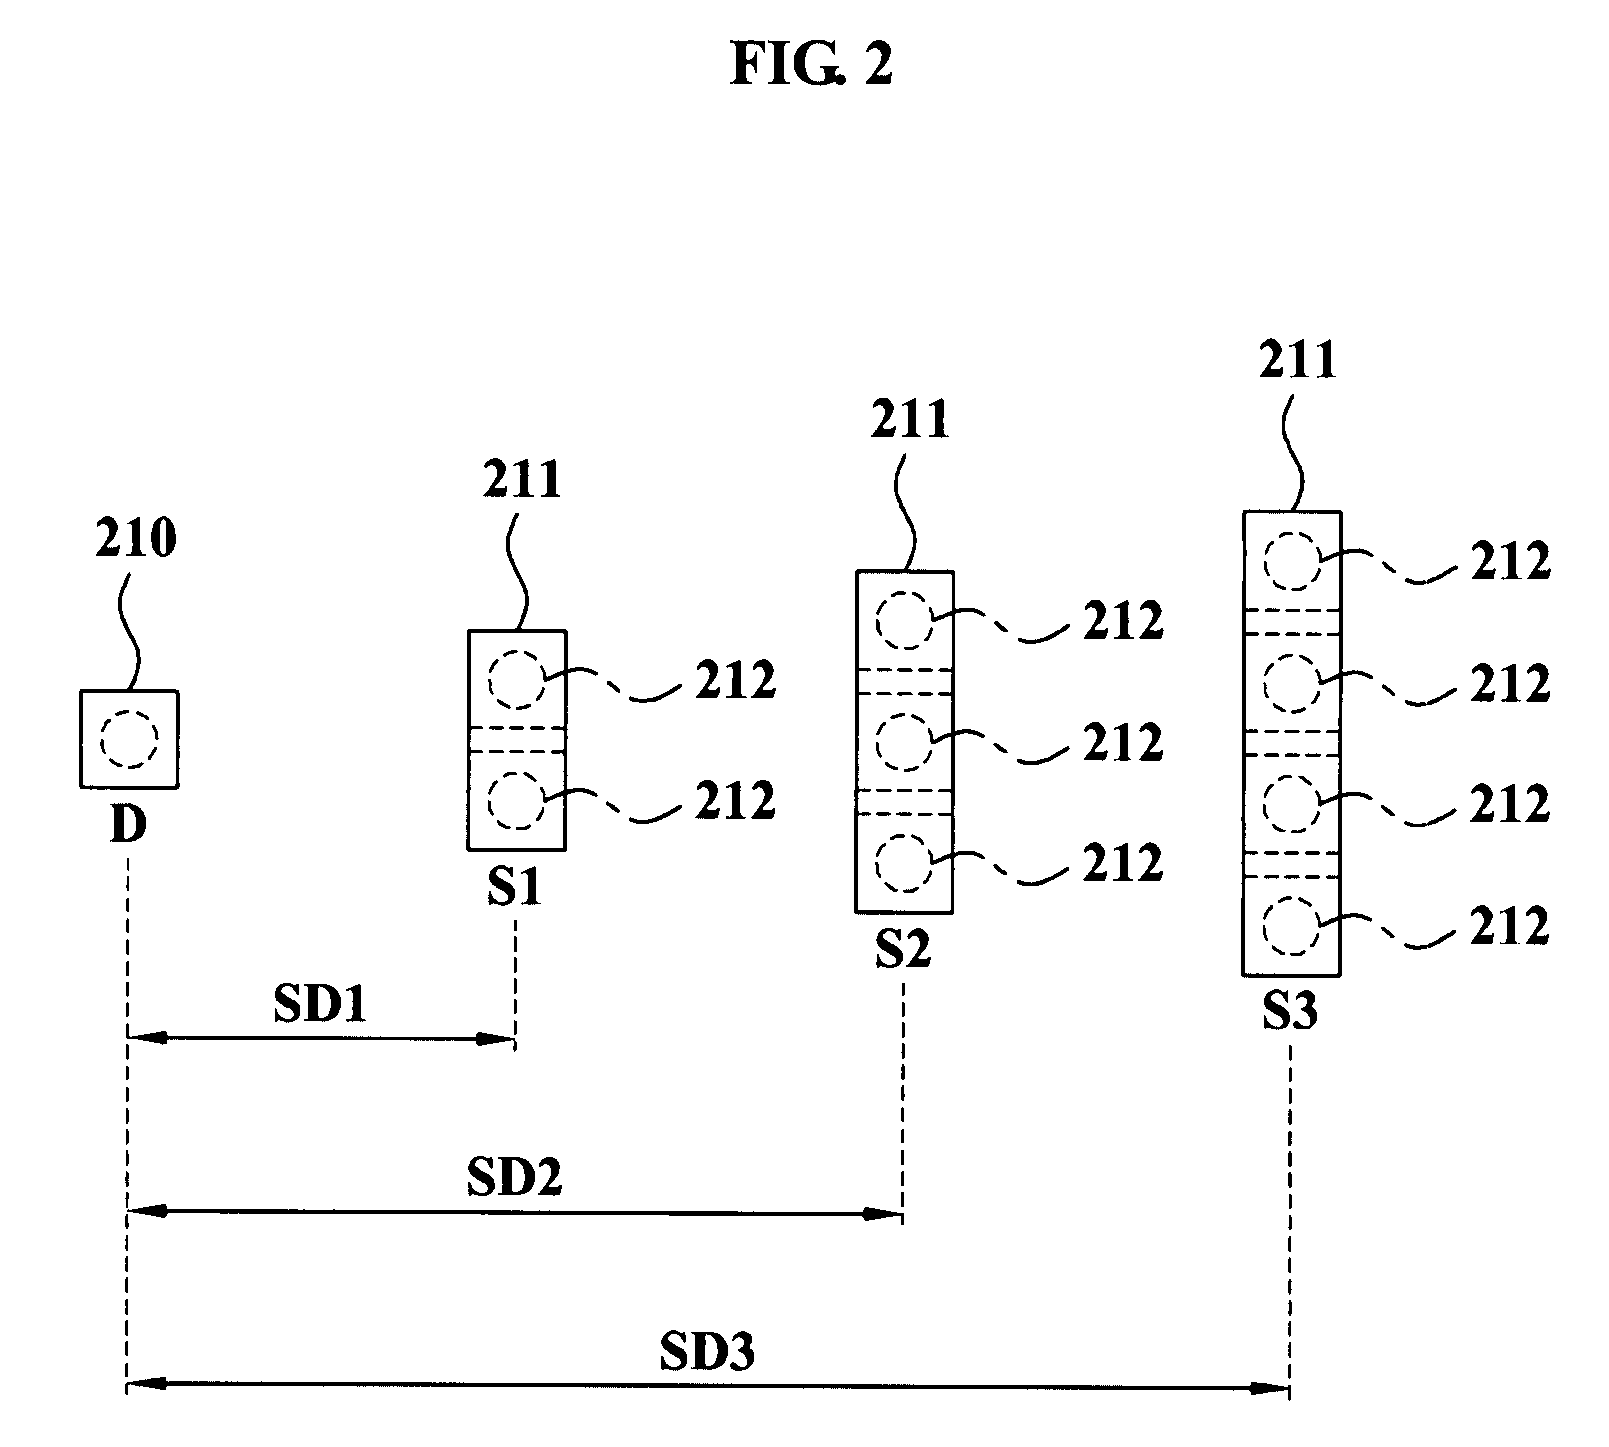 Body fat measurement apparatus and method of operating the apparatus